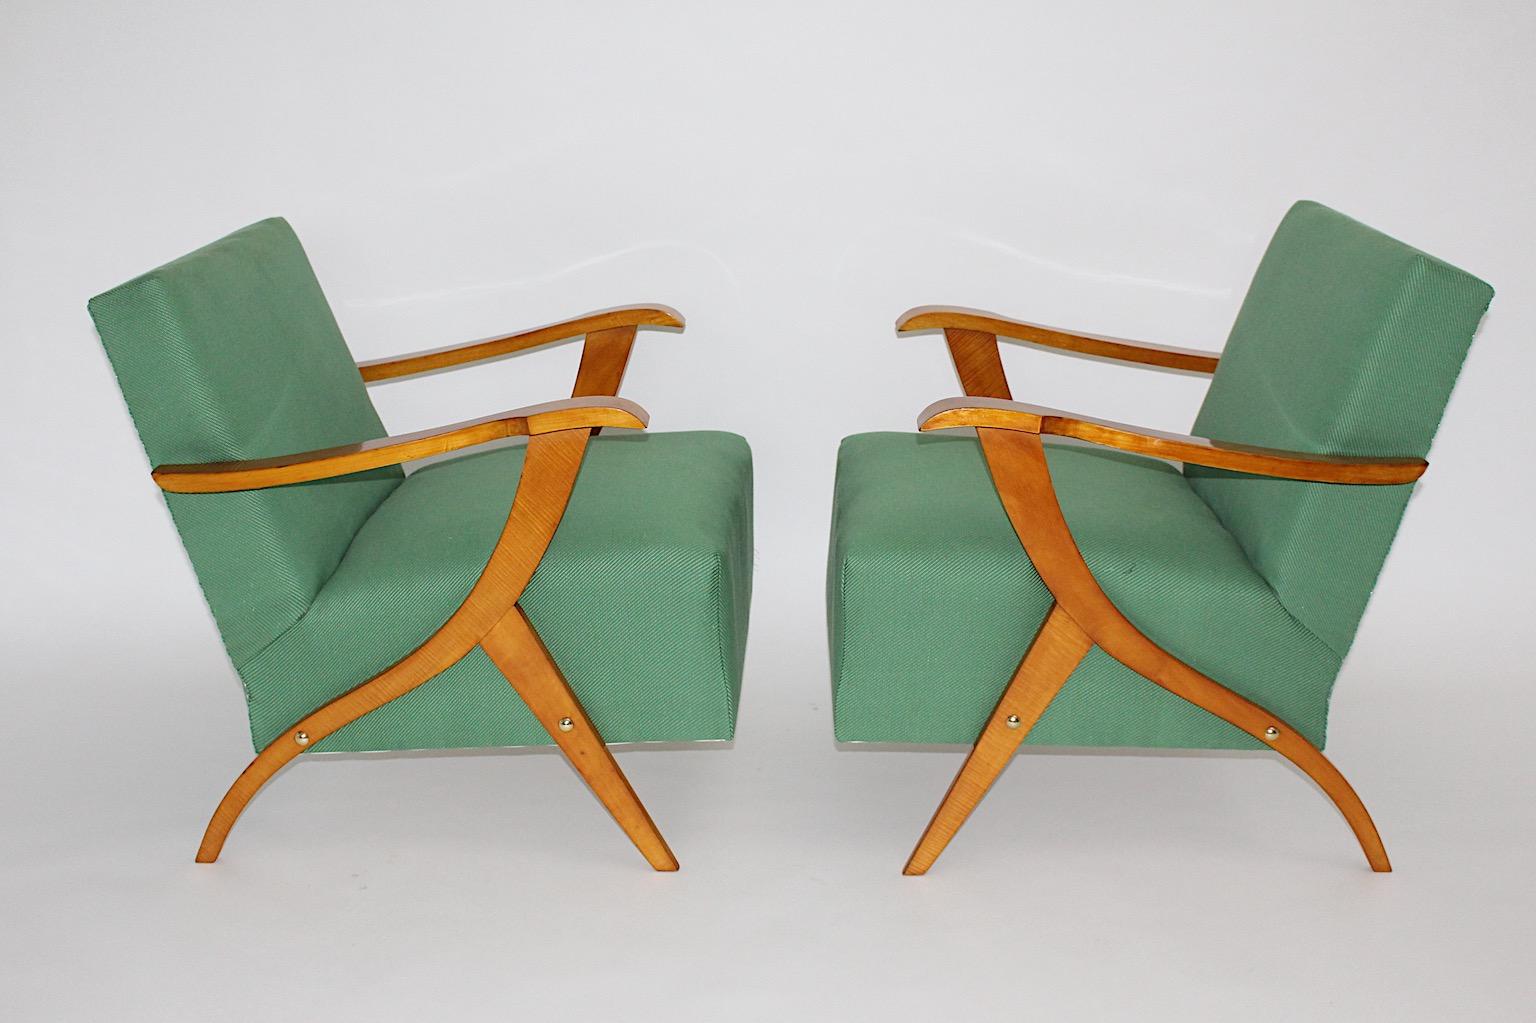 Mid century modern vintage lounge chairs a pair from maple tree and spruce design in style of Carlo Mollino in Italy, 1950s.
A beautiful pair of lounge chairs in organic sculptural shape from maple tree, spruce, brass and textile fabric.
While the